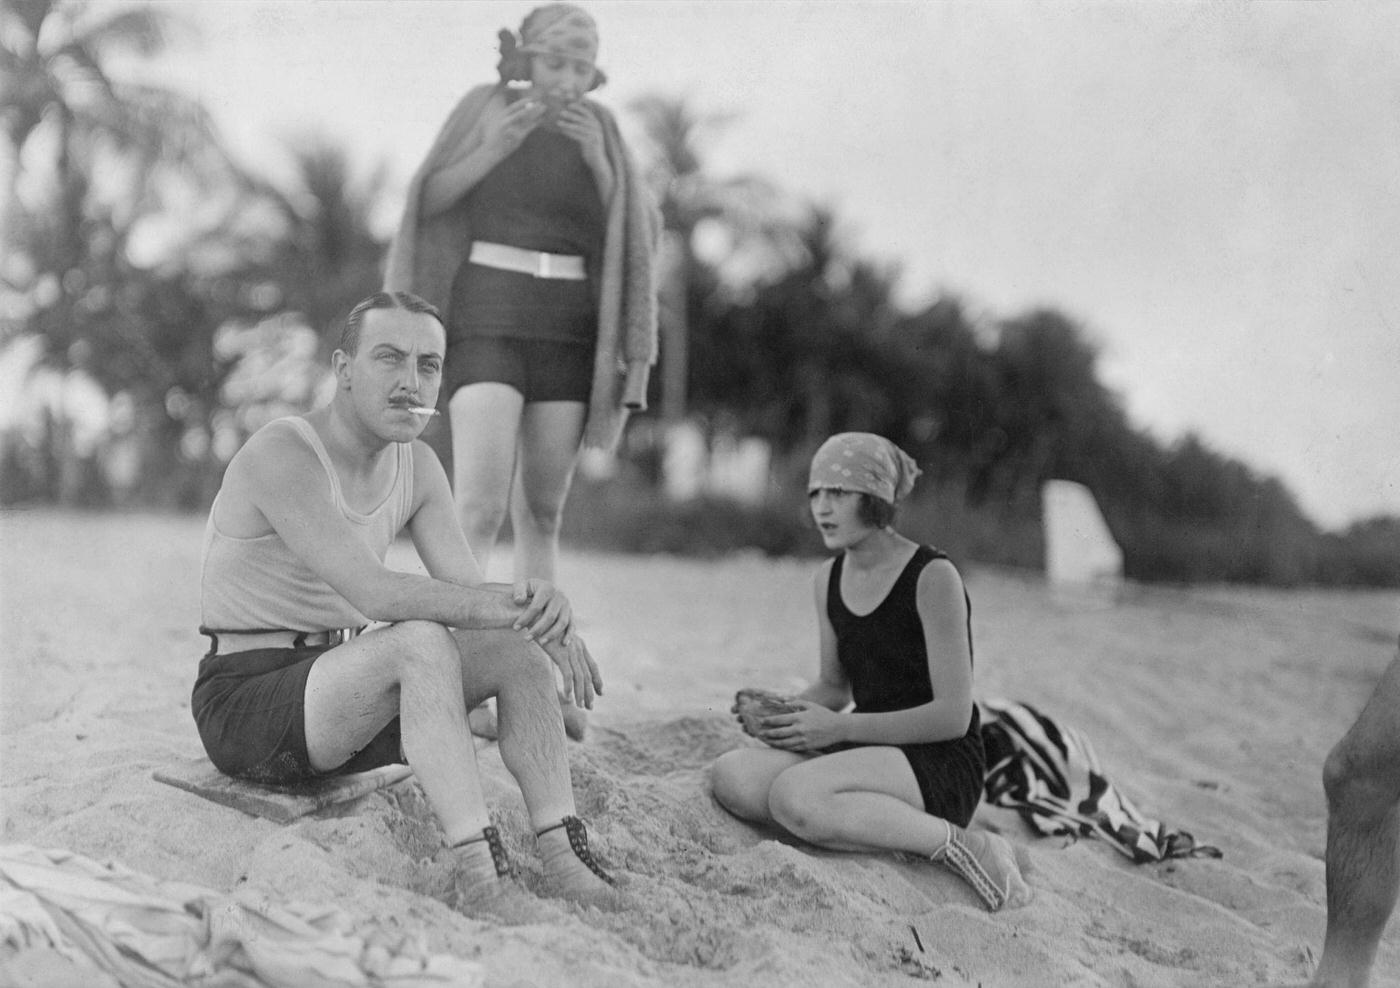 Actors' Vacation in Miami Beach, 1923: Millie Muller, Beatrice Coburn, and Fred Hadley with Cigarettes